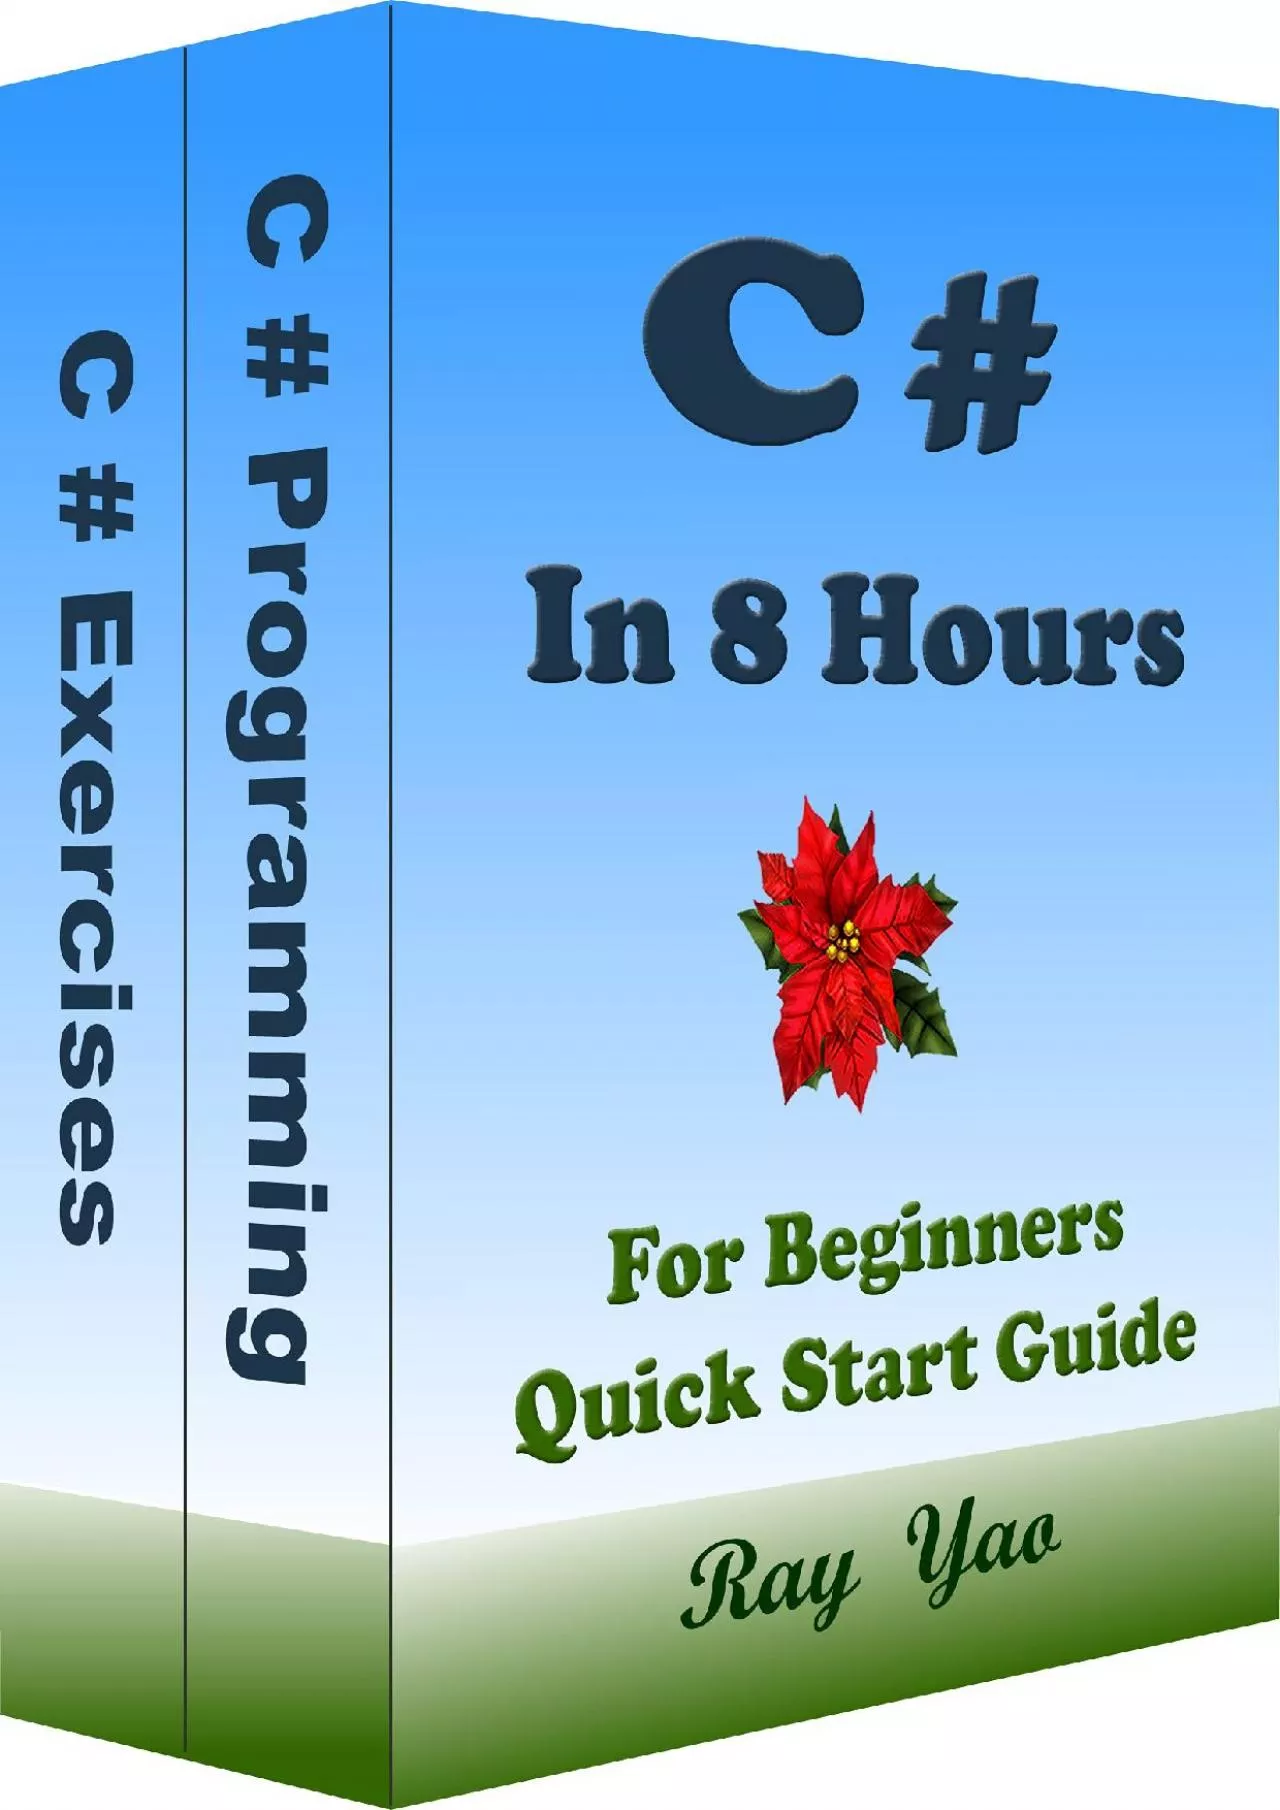 [READING BOOK]-C Programming, In 8 Hours, For Beginners, Quick Start Guide: C Language,